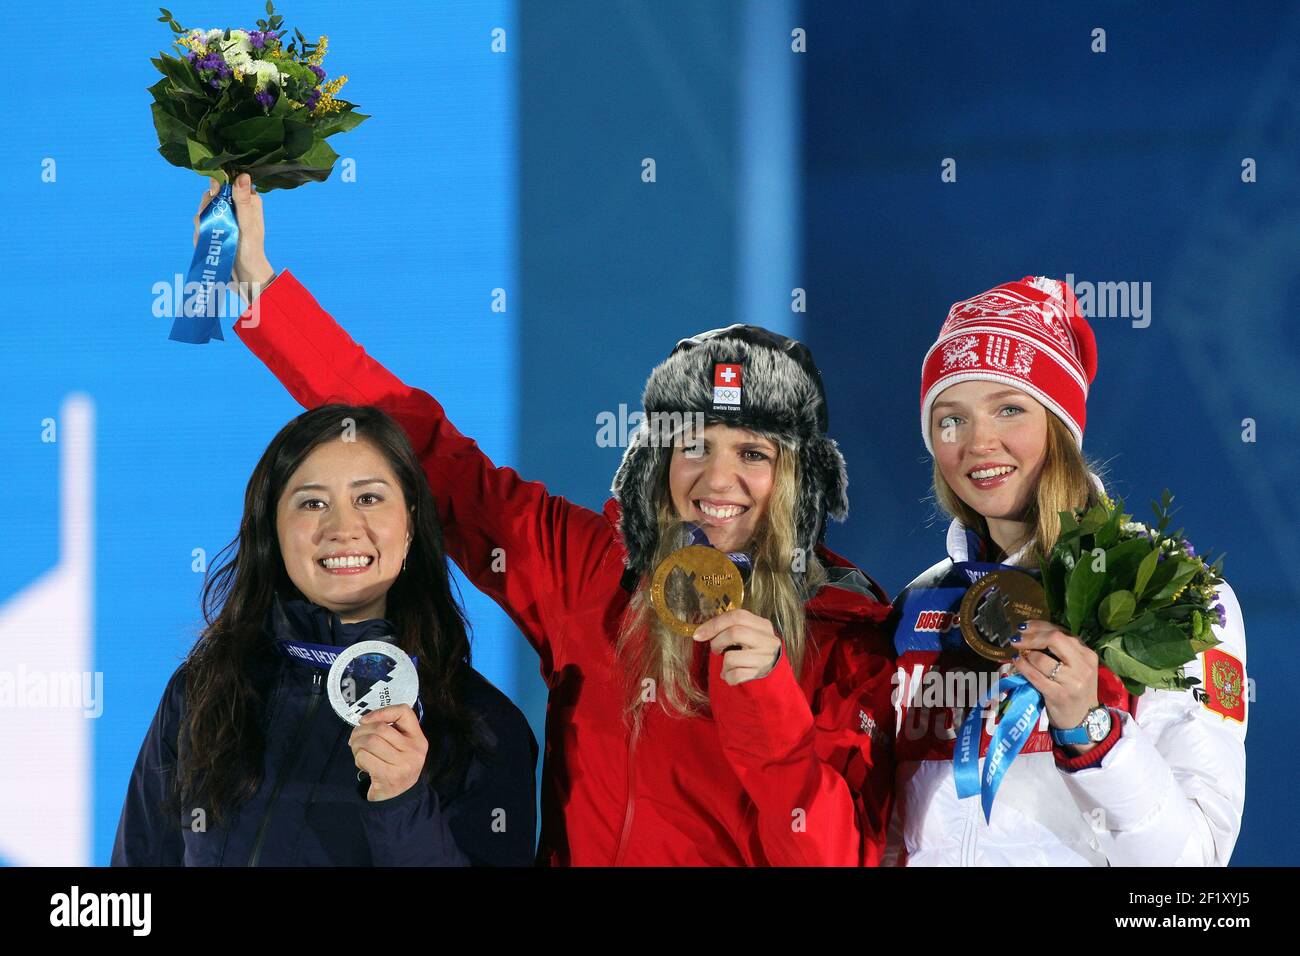 Snowboard Ladies' Parallel Giant Slalom Podium, Tomoka Takeuchi from Japan, silver medal, Patrizia Kummer from Switzerland, gold medal and Alena Zavarzina from Russia, bronze medal, at the place medals during the XXII Winter Olympic Games Sotchi 2014, day 12, on February 19, 2014 in Sochi, Russia. Photo Pool KMSP / DPPI Stock Photo